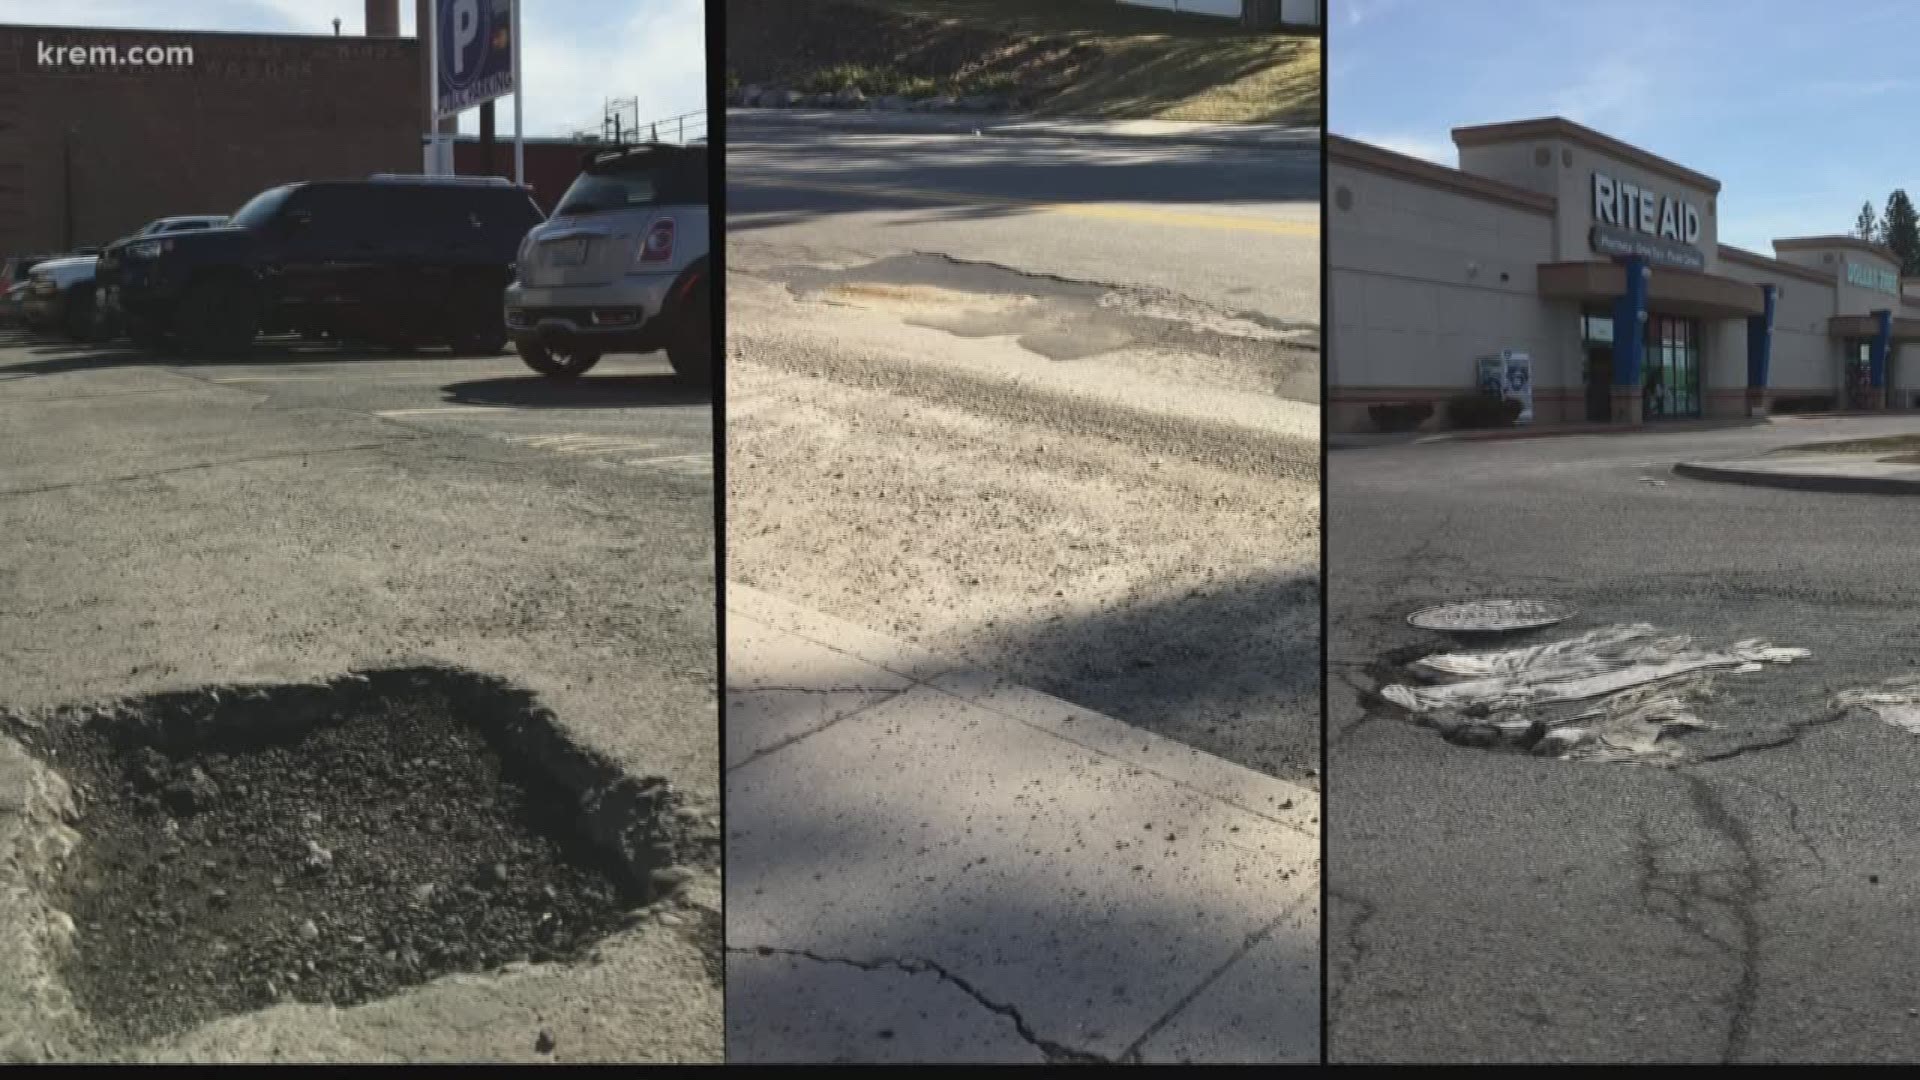 All of that moisture seeps into cracks and expands when it freezes causing those pesky potholes. Your commute will likely be a little bumpy. KREM 2's Tim Pham went for a ride to find the worst spots in town so you know the areas areas to avoid.